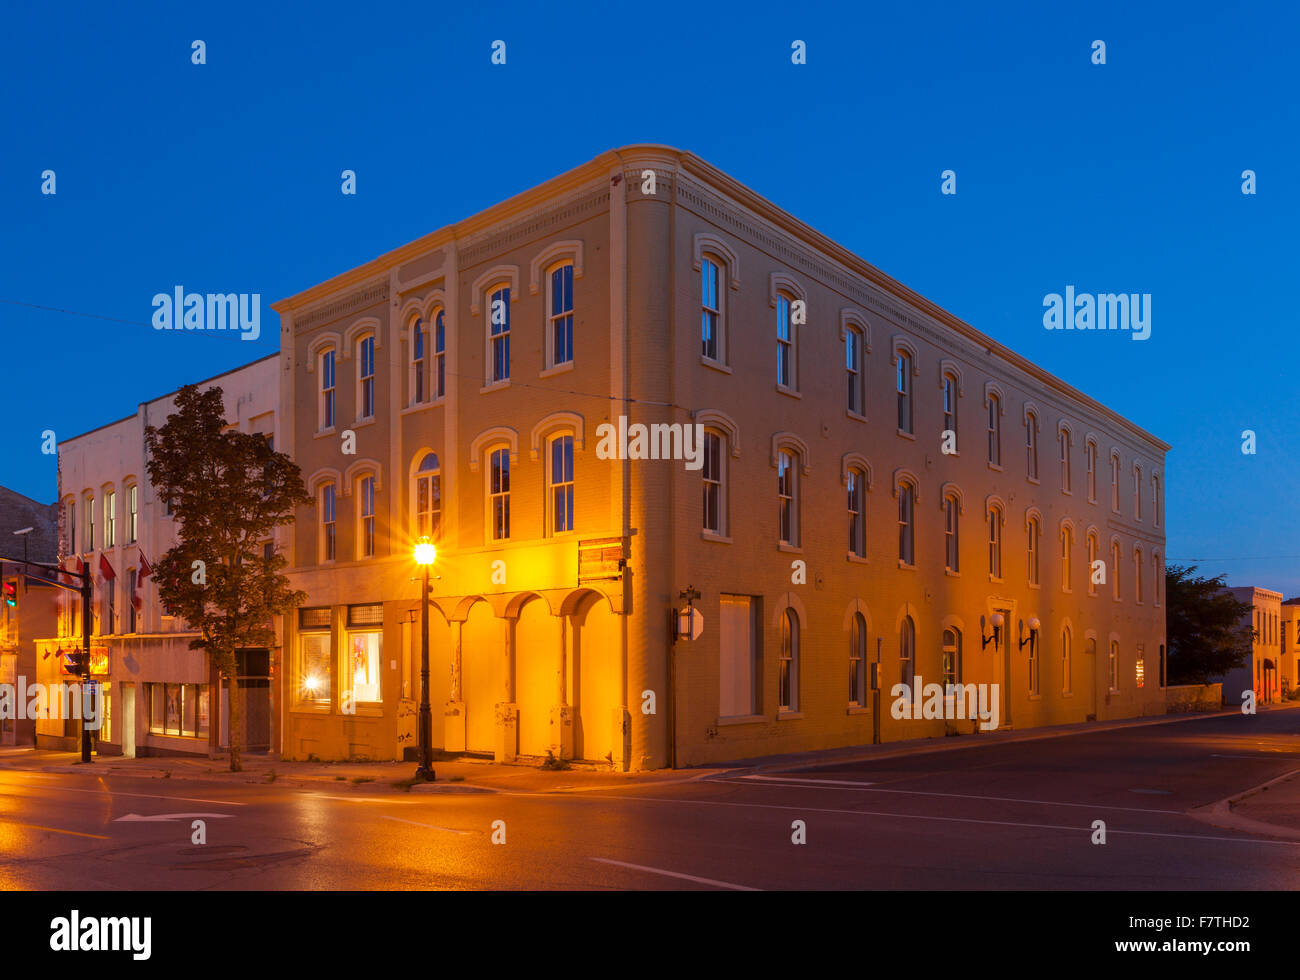 The historic Walton Hotel at  the corner of John Street and Walton Street in downtown Port Hope at dusk. Ontario, Canada. Stock Photo